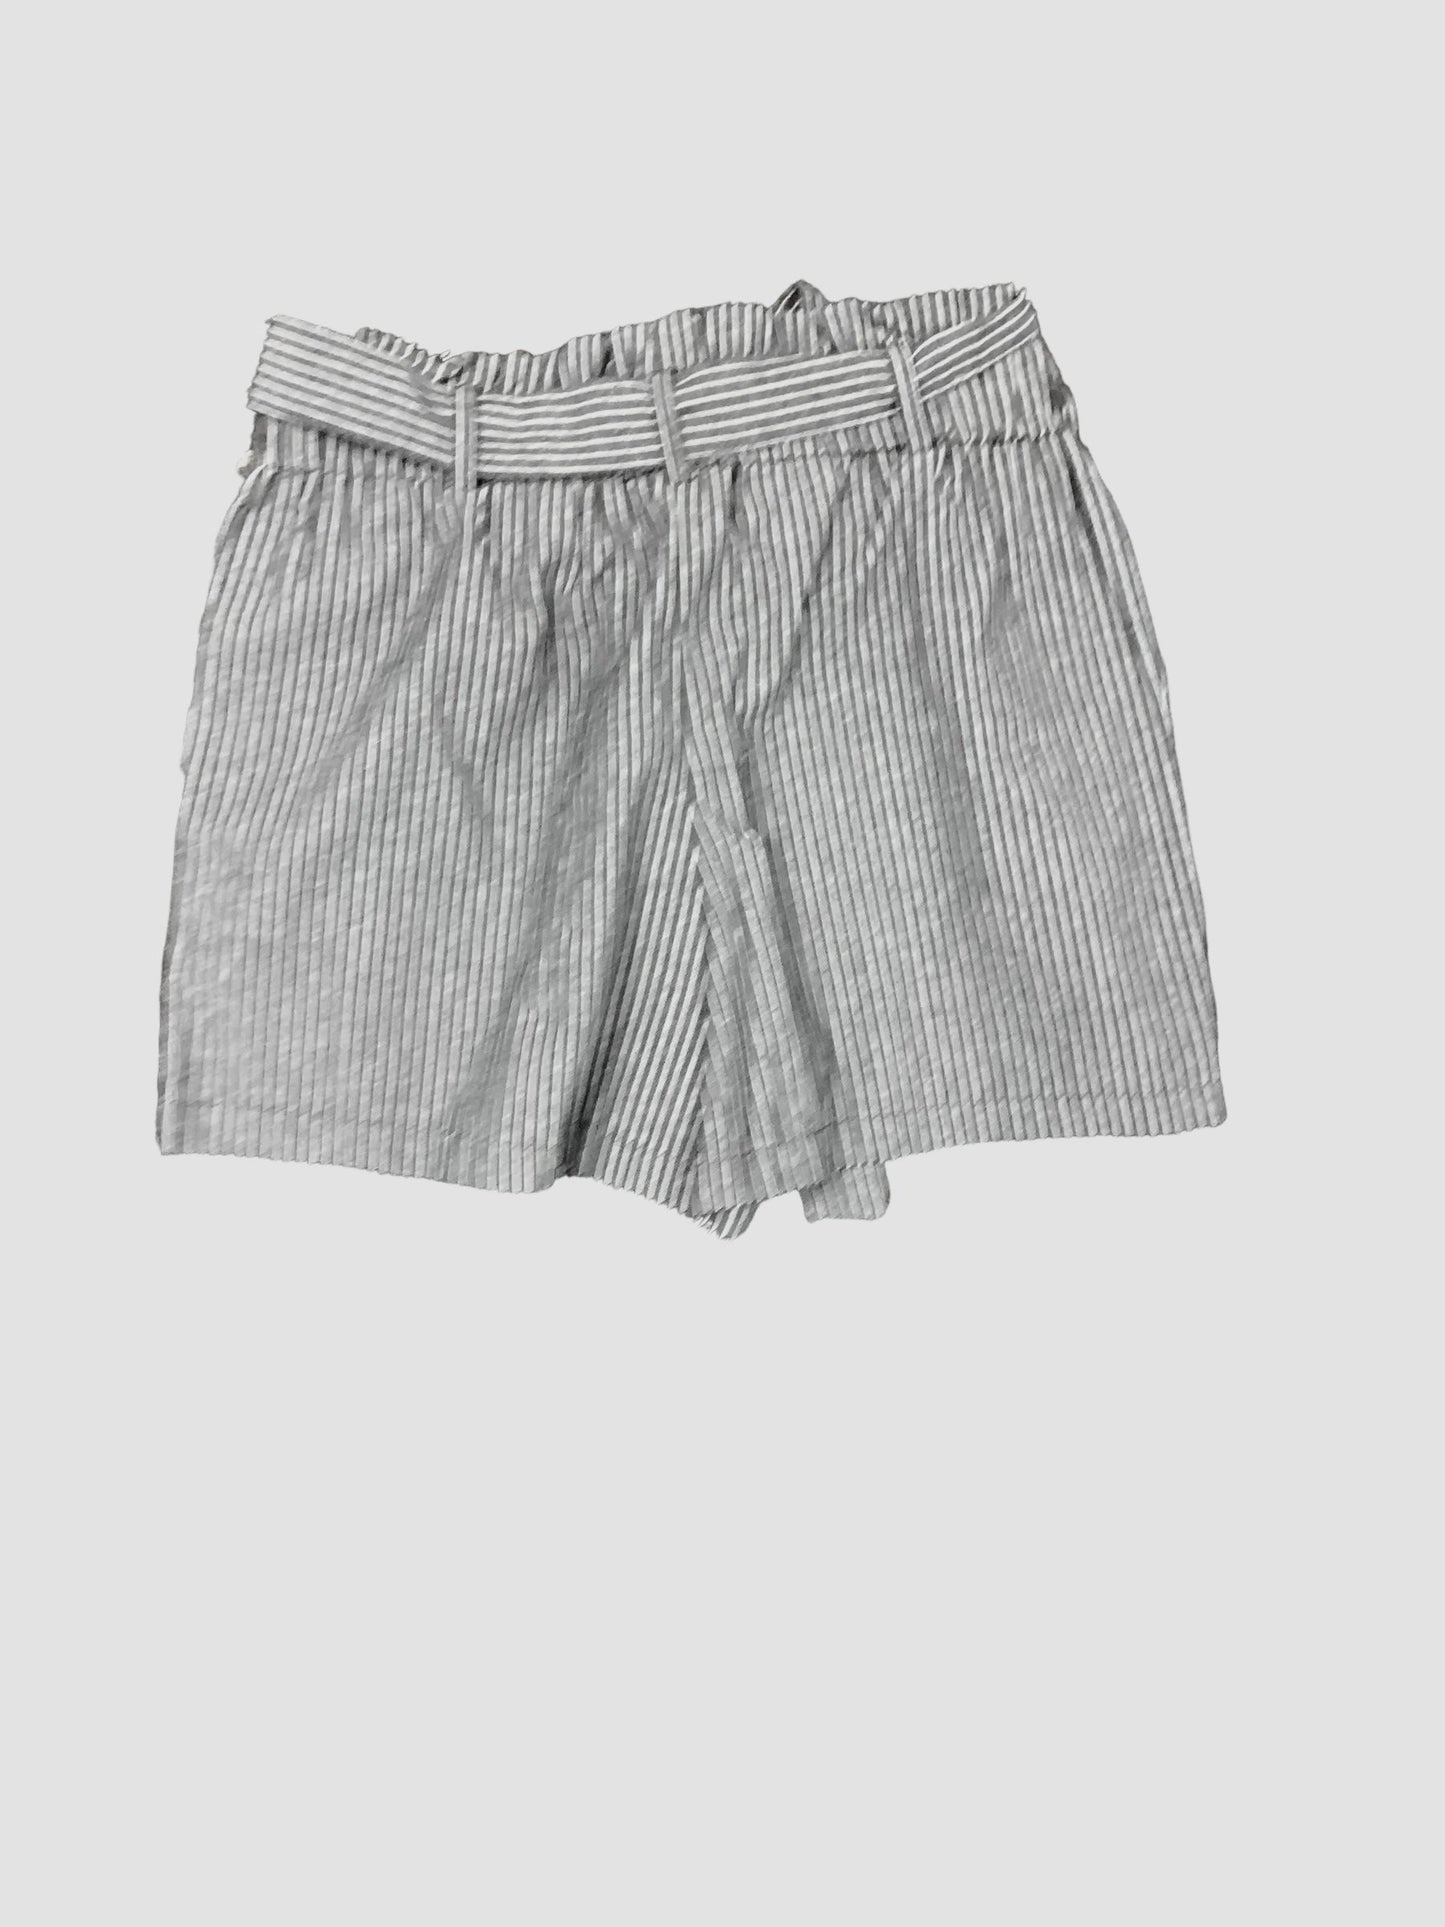 Shorts By Clothes Mentor  Size: L